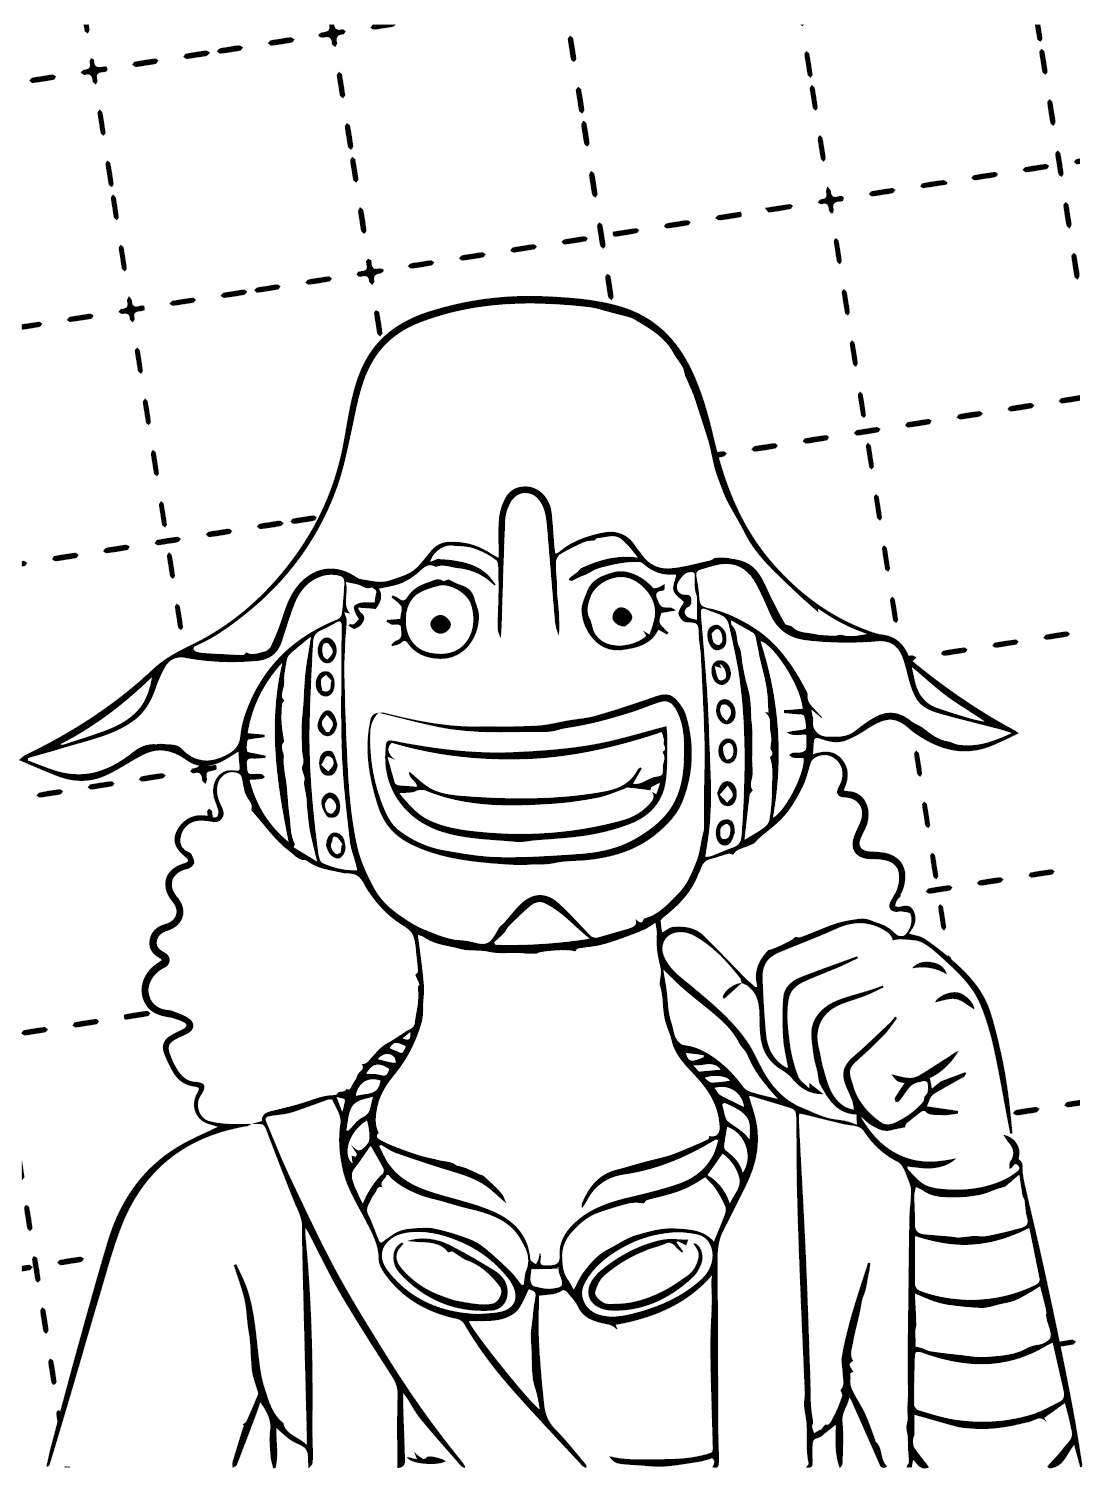 Usopp from One Piece Coloring Page from Anime